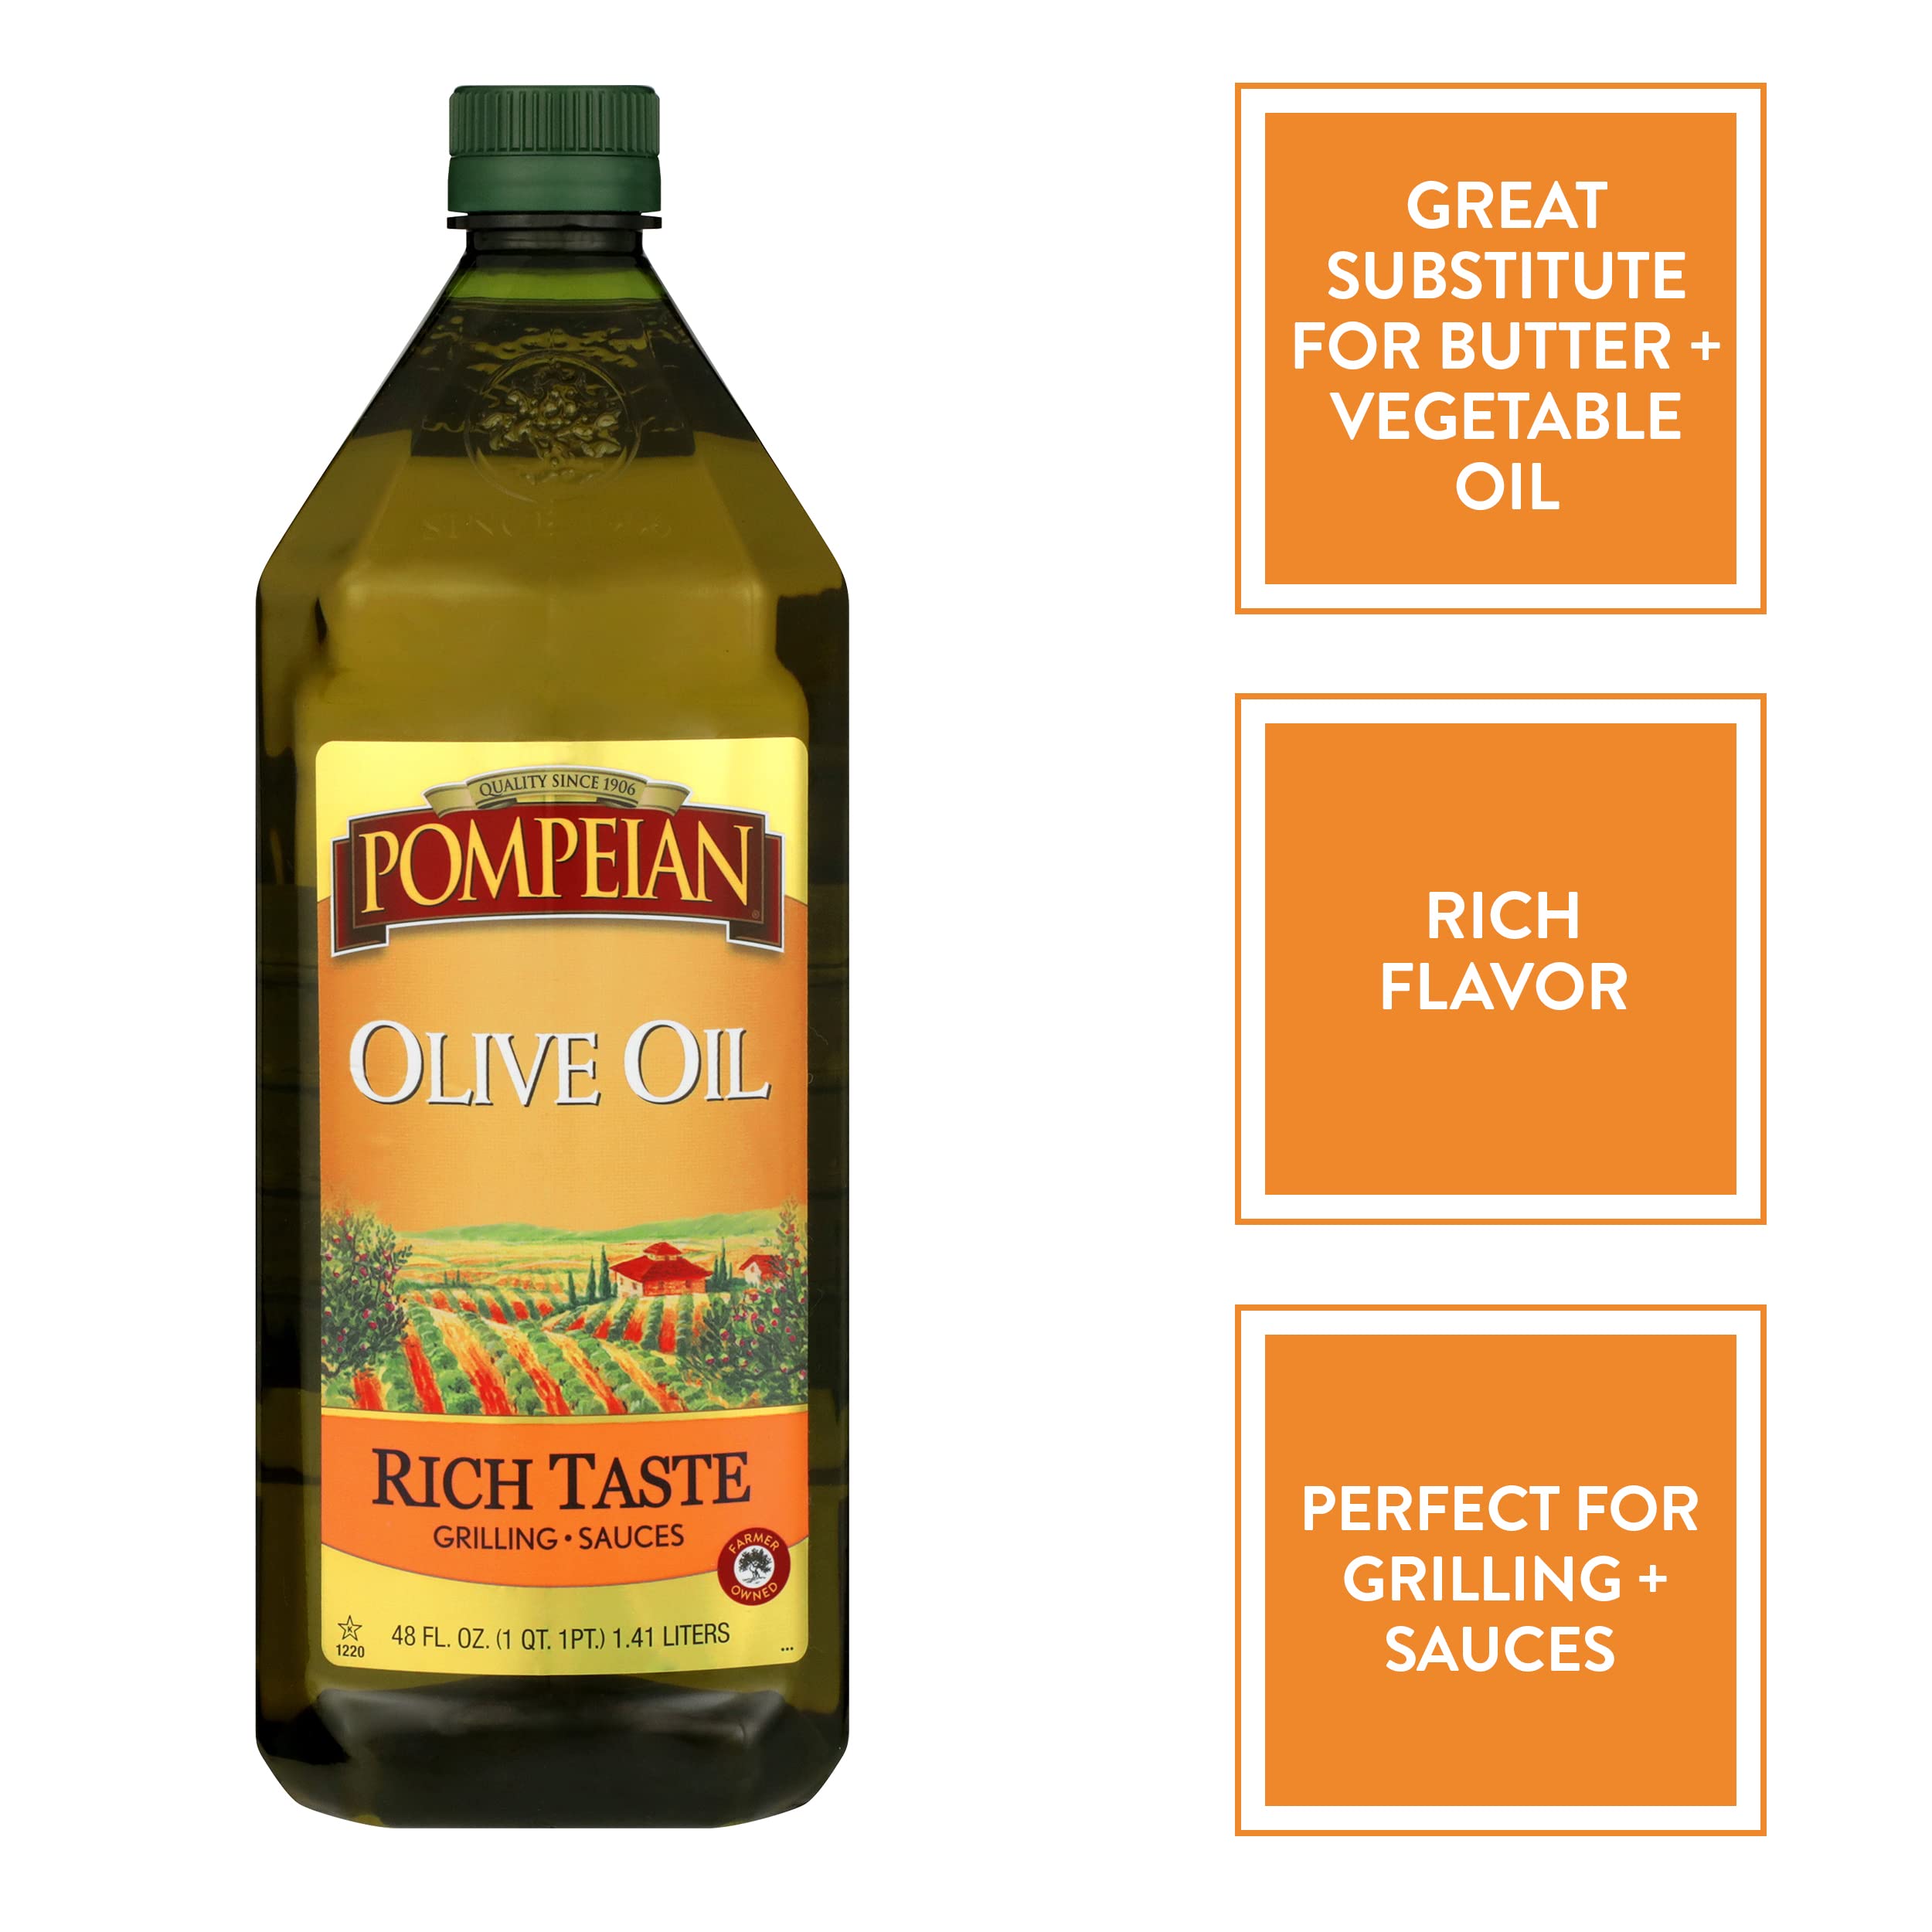 48oz. Pompeian Rich Taste Olive Oil, Rich, Full Flavor $9.34 Free Shipping w/ Prime or on $35